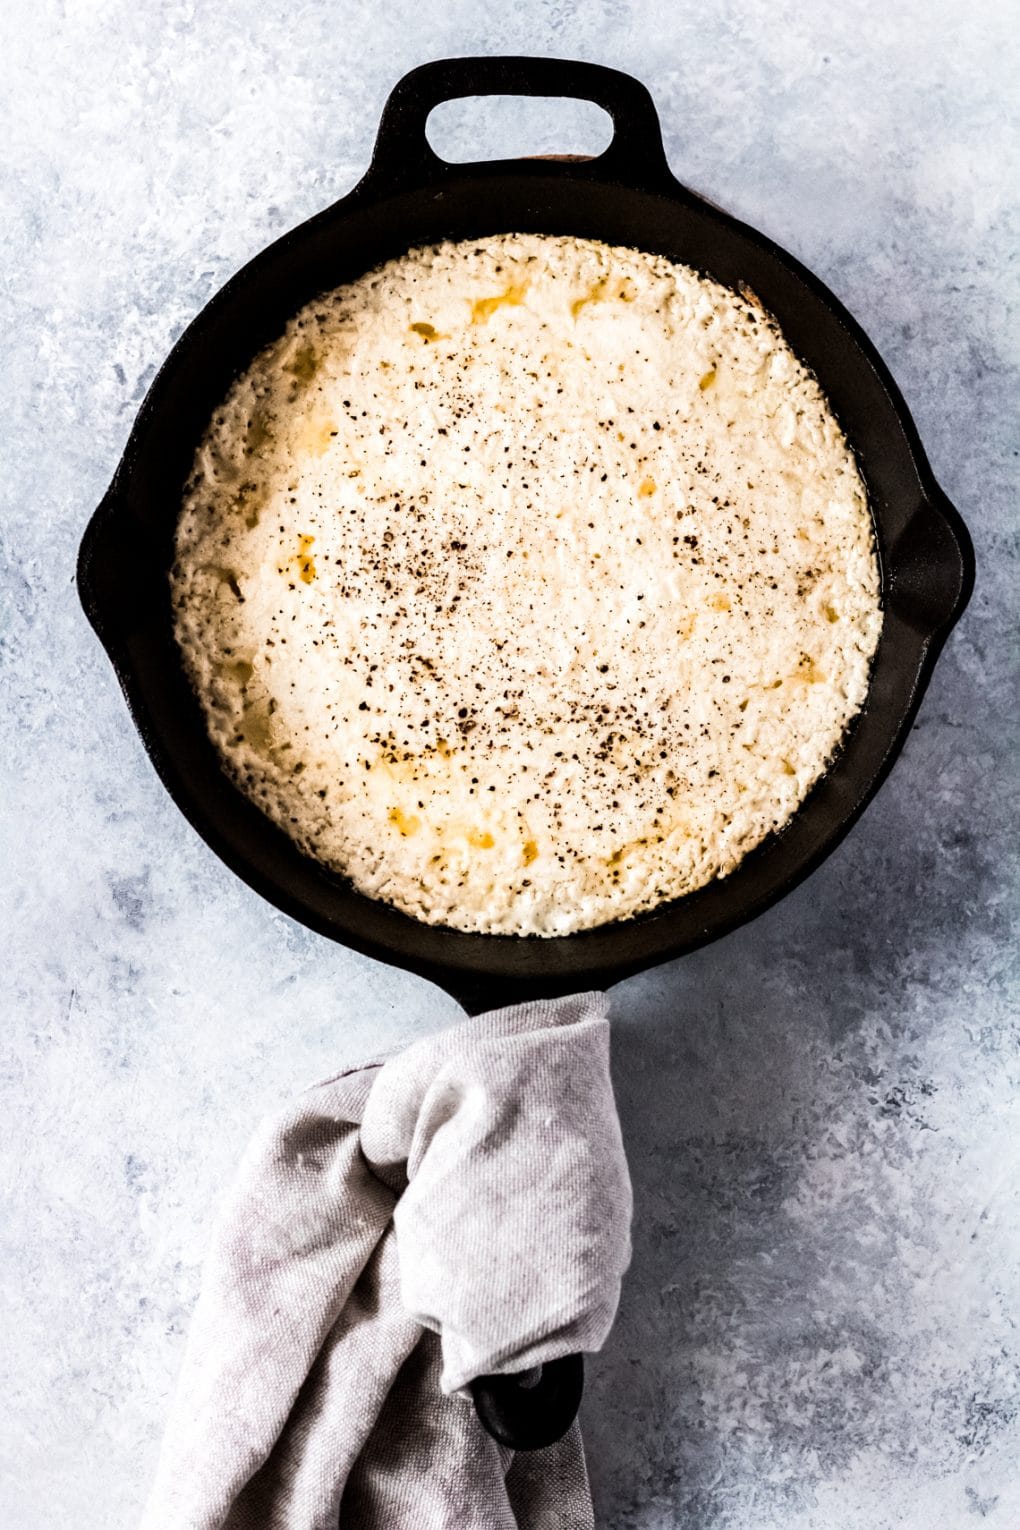 baked ricotta dip in a cast iron skillet with a neutral colored towel wrapped around the handle.